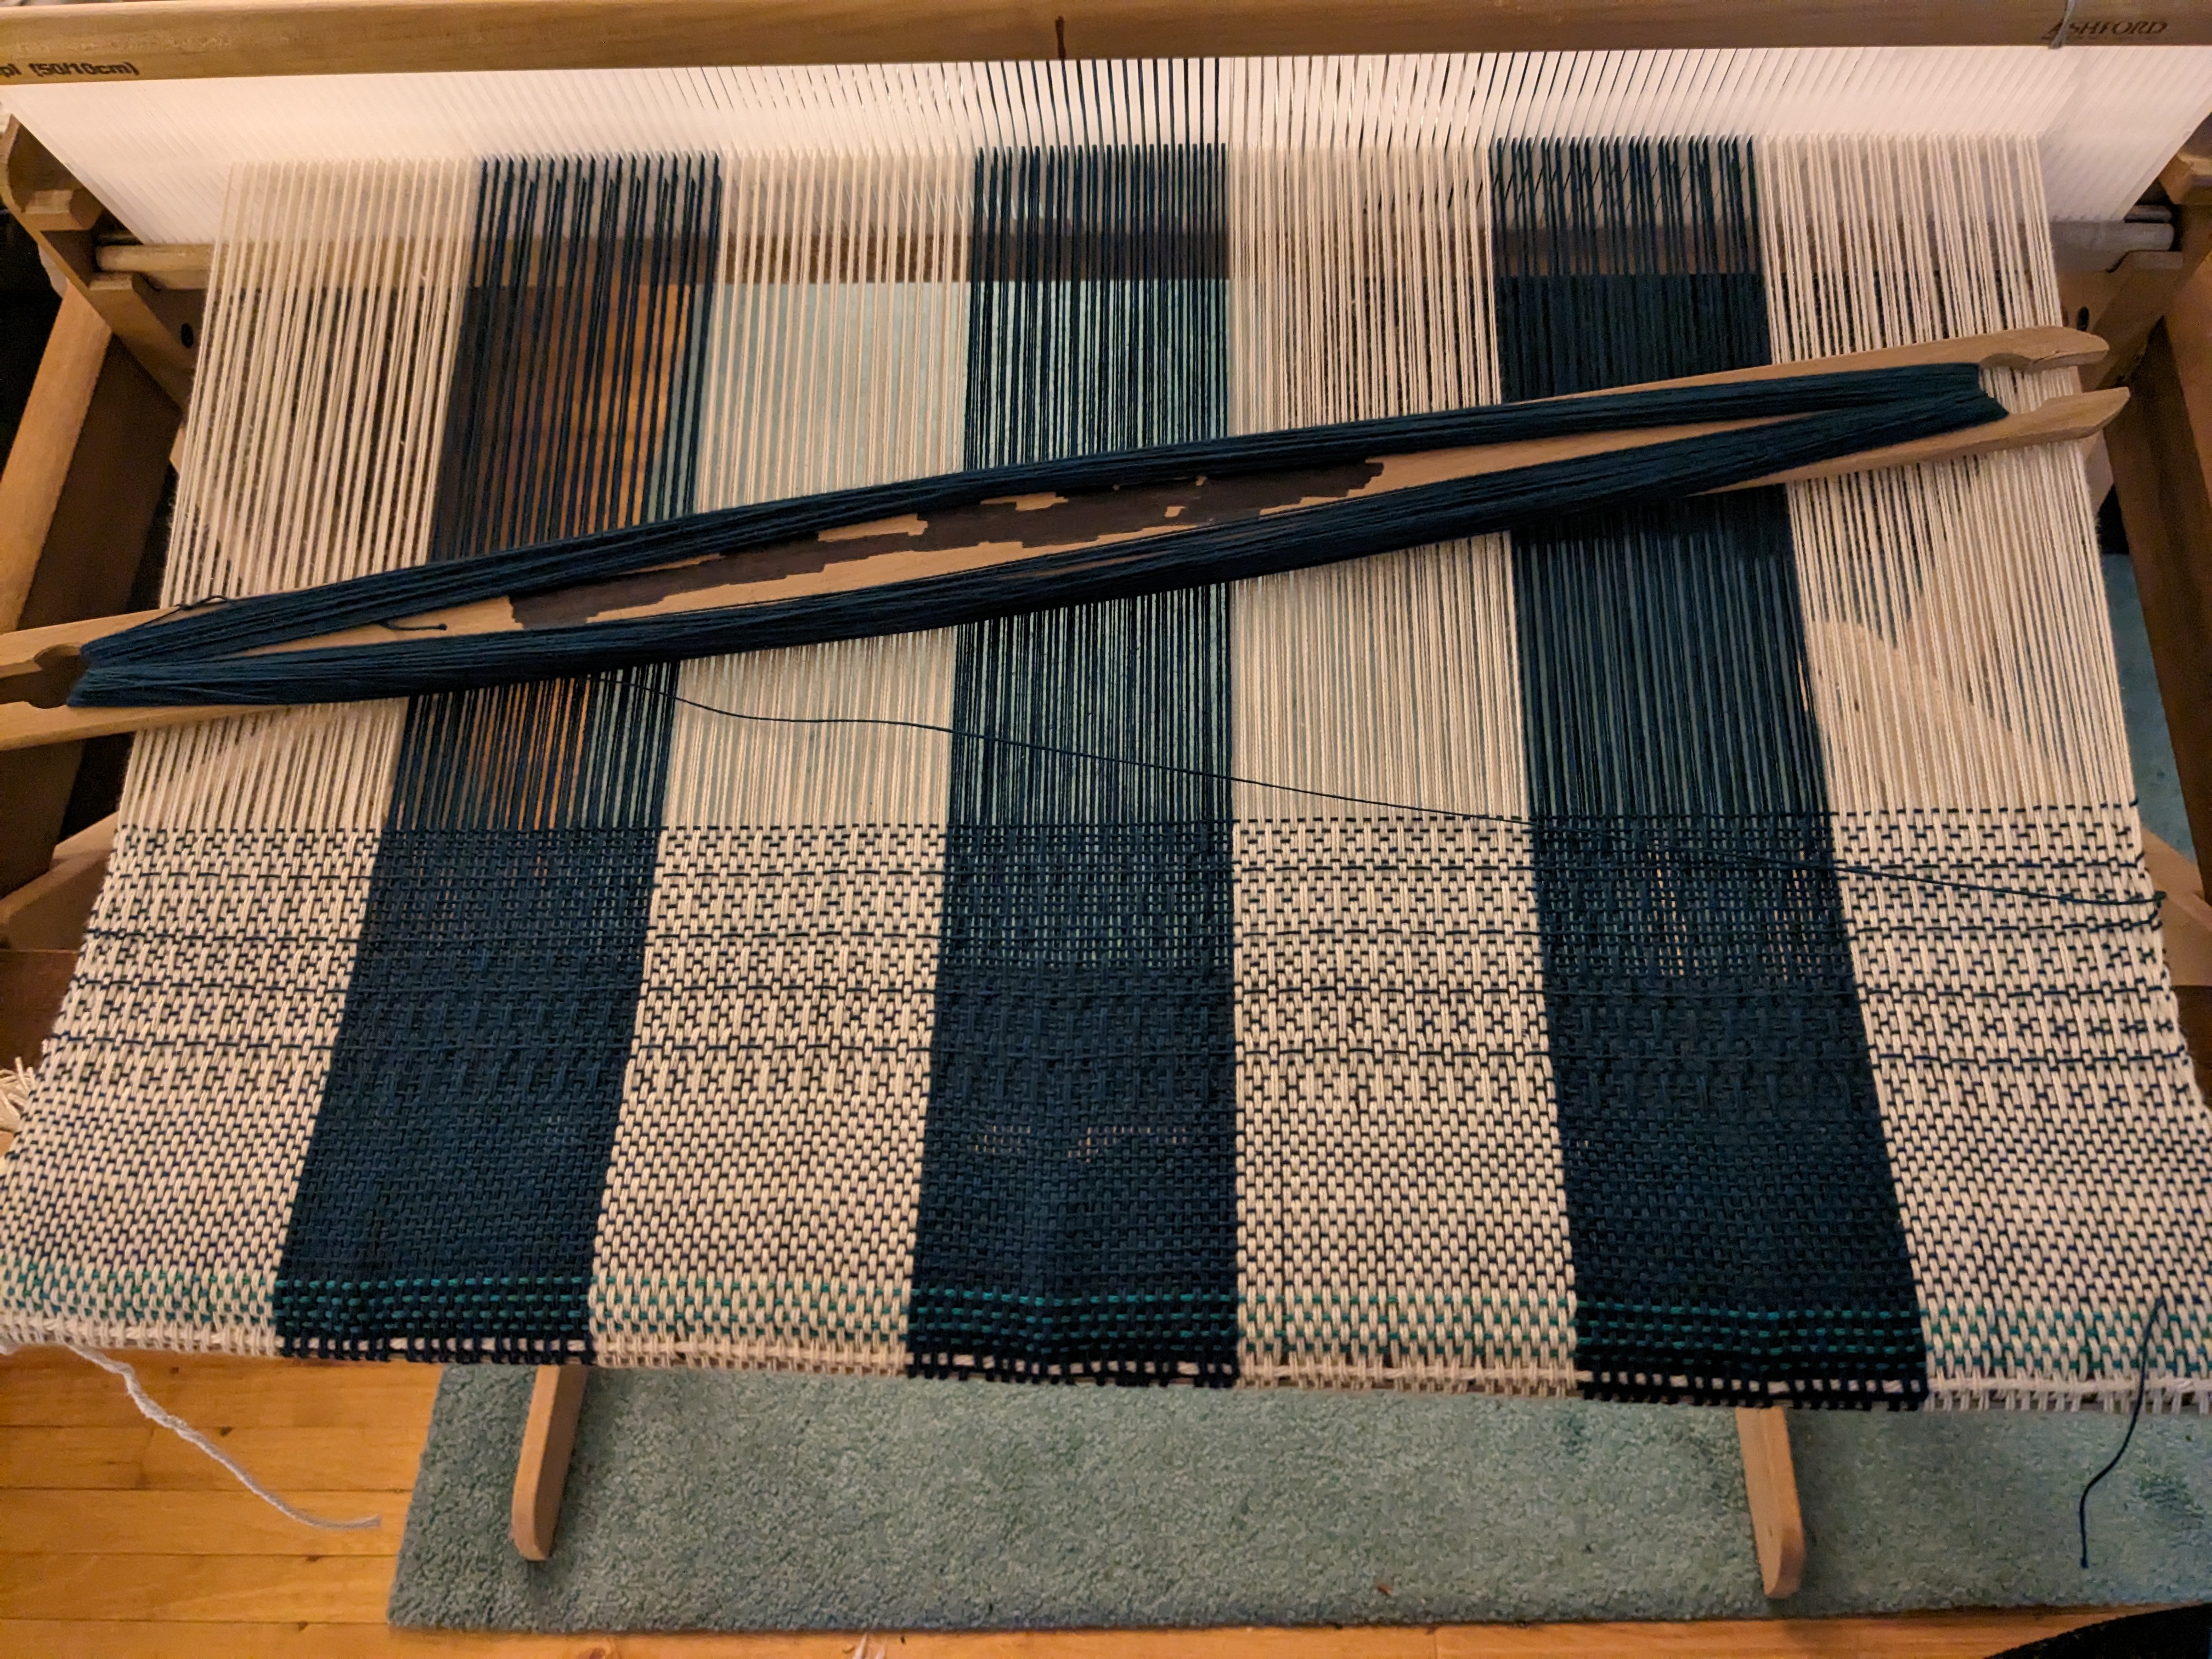 A few inches of weaving a blue and natural buffalo check pattern with pick up